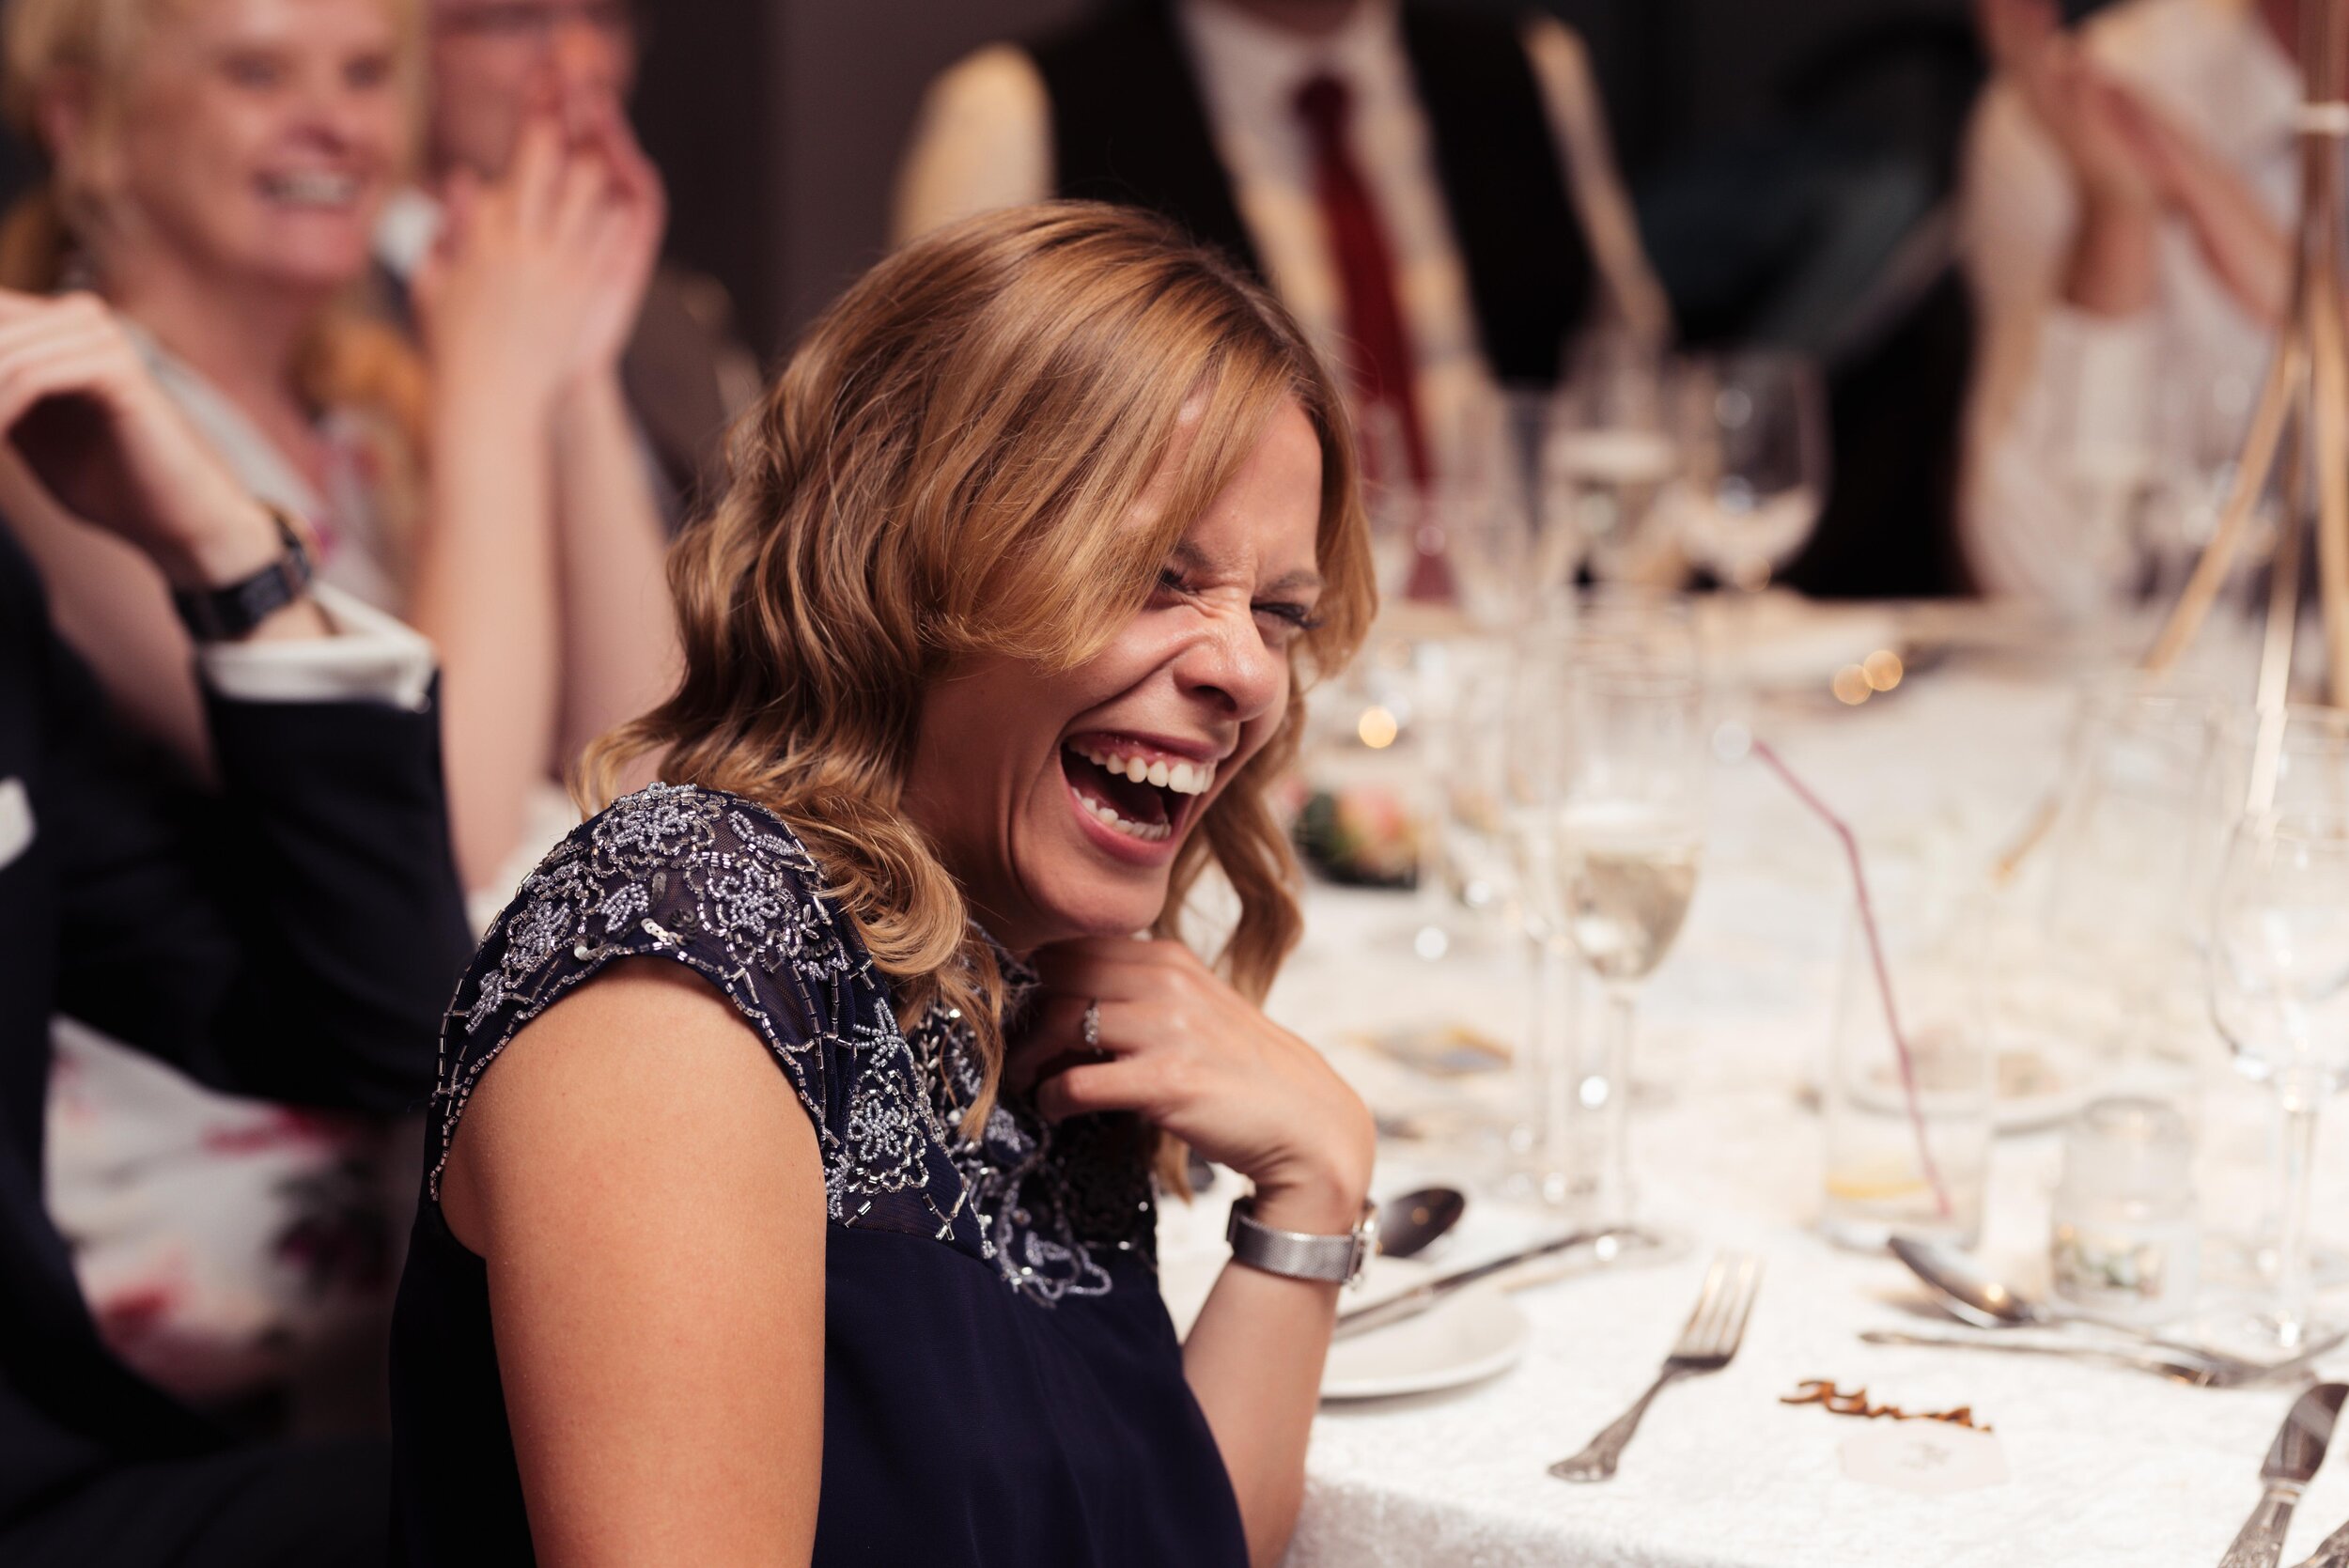 Wedding guest laughs out loud during the speeches